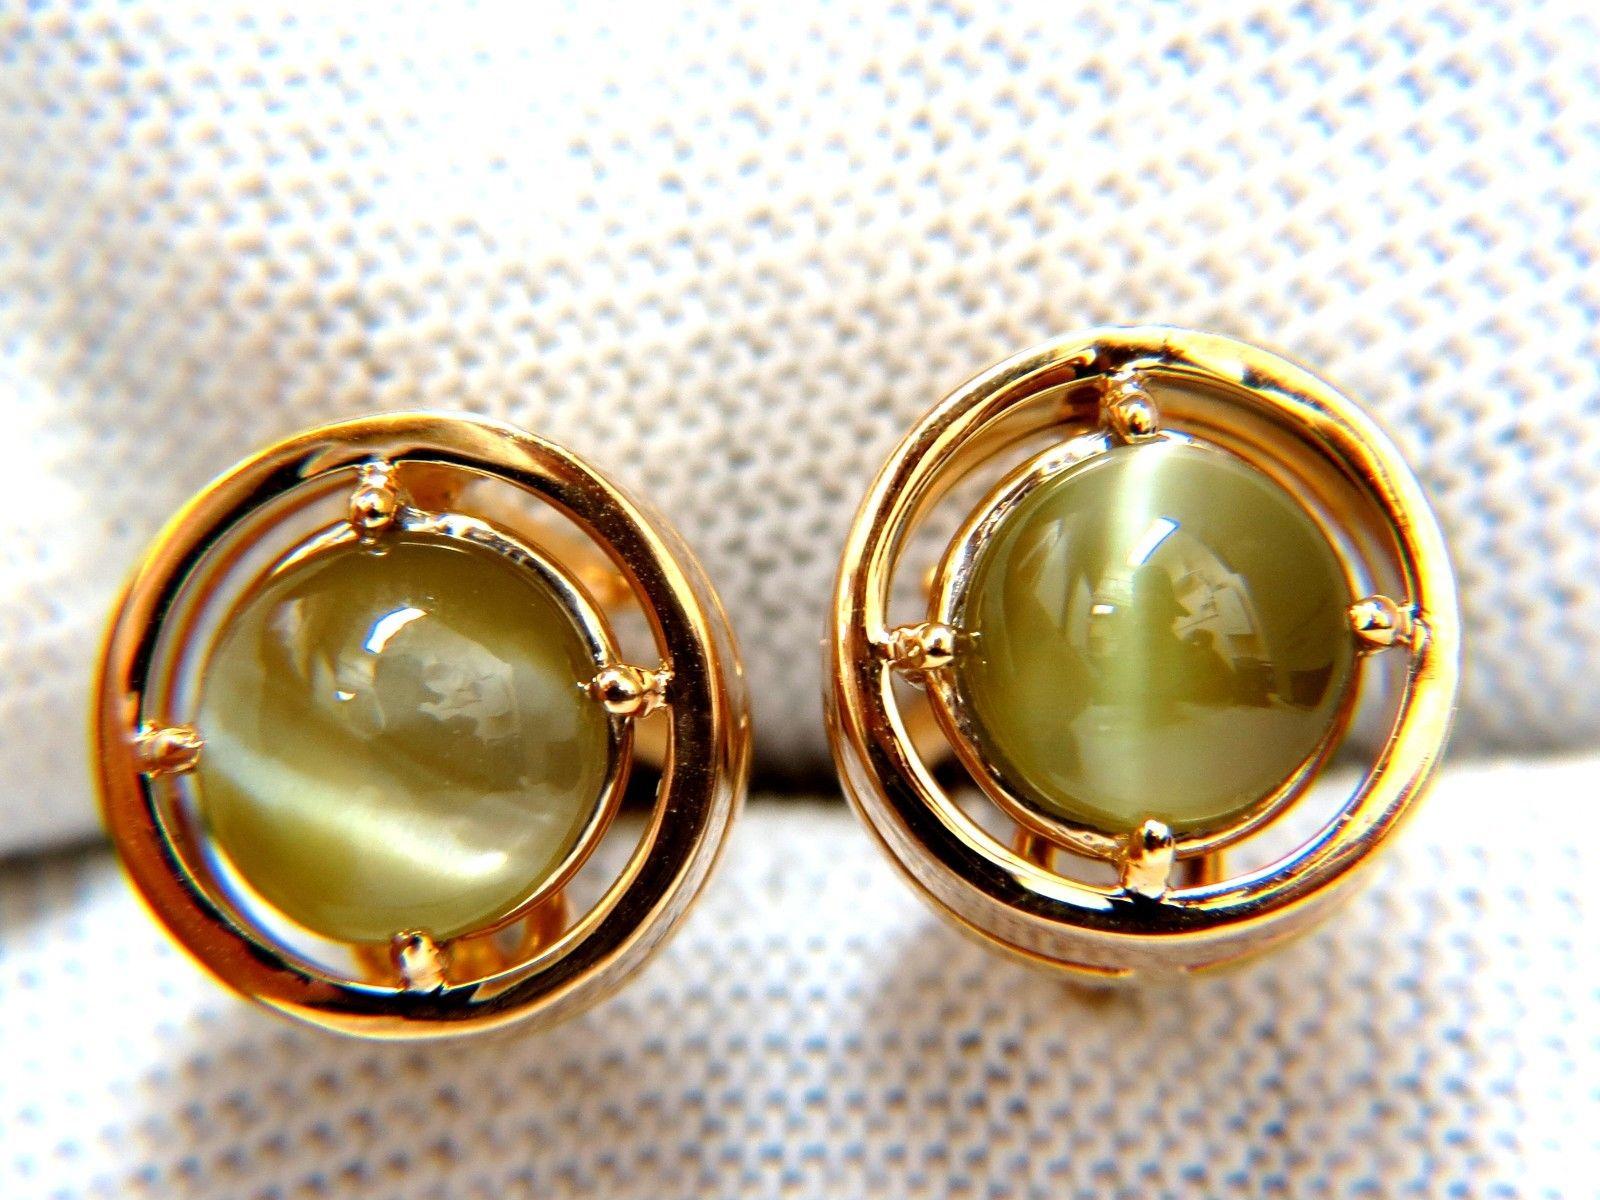 The Special.



4.00ct. Natural Untreated Cats-eye clip earrings.

7.24 & 7.10mm

Very good eye line.

 Earrings Overall:

11.4mm wide

Depth: 7.8mm

comfortable omega backs

8 grams.

14kt. yellow gold.

$6000 appraisal will accompany